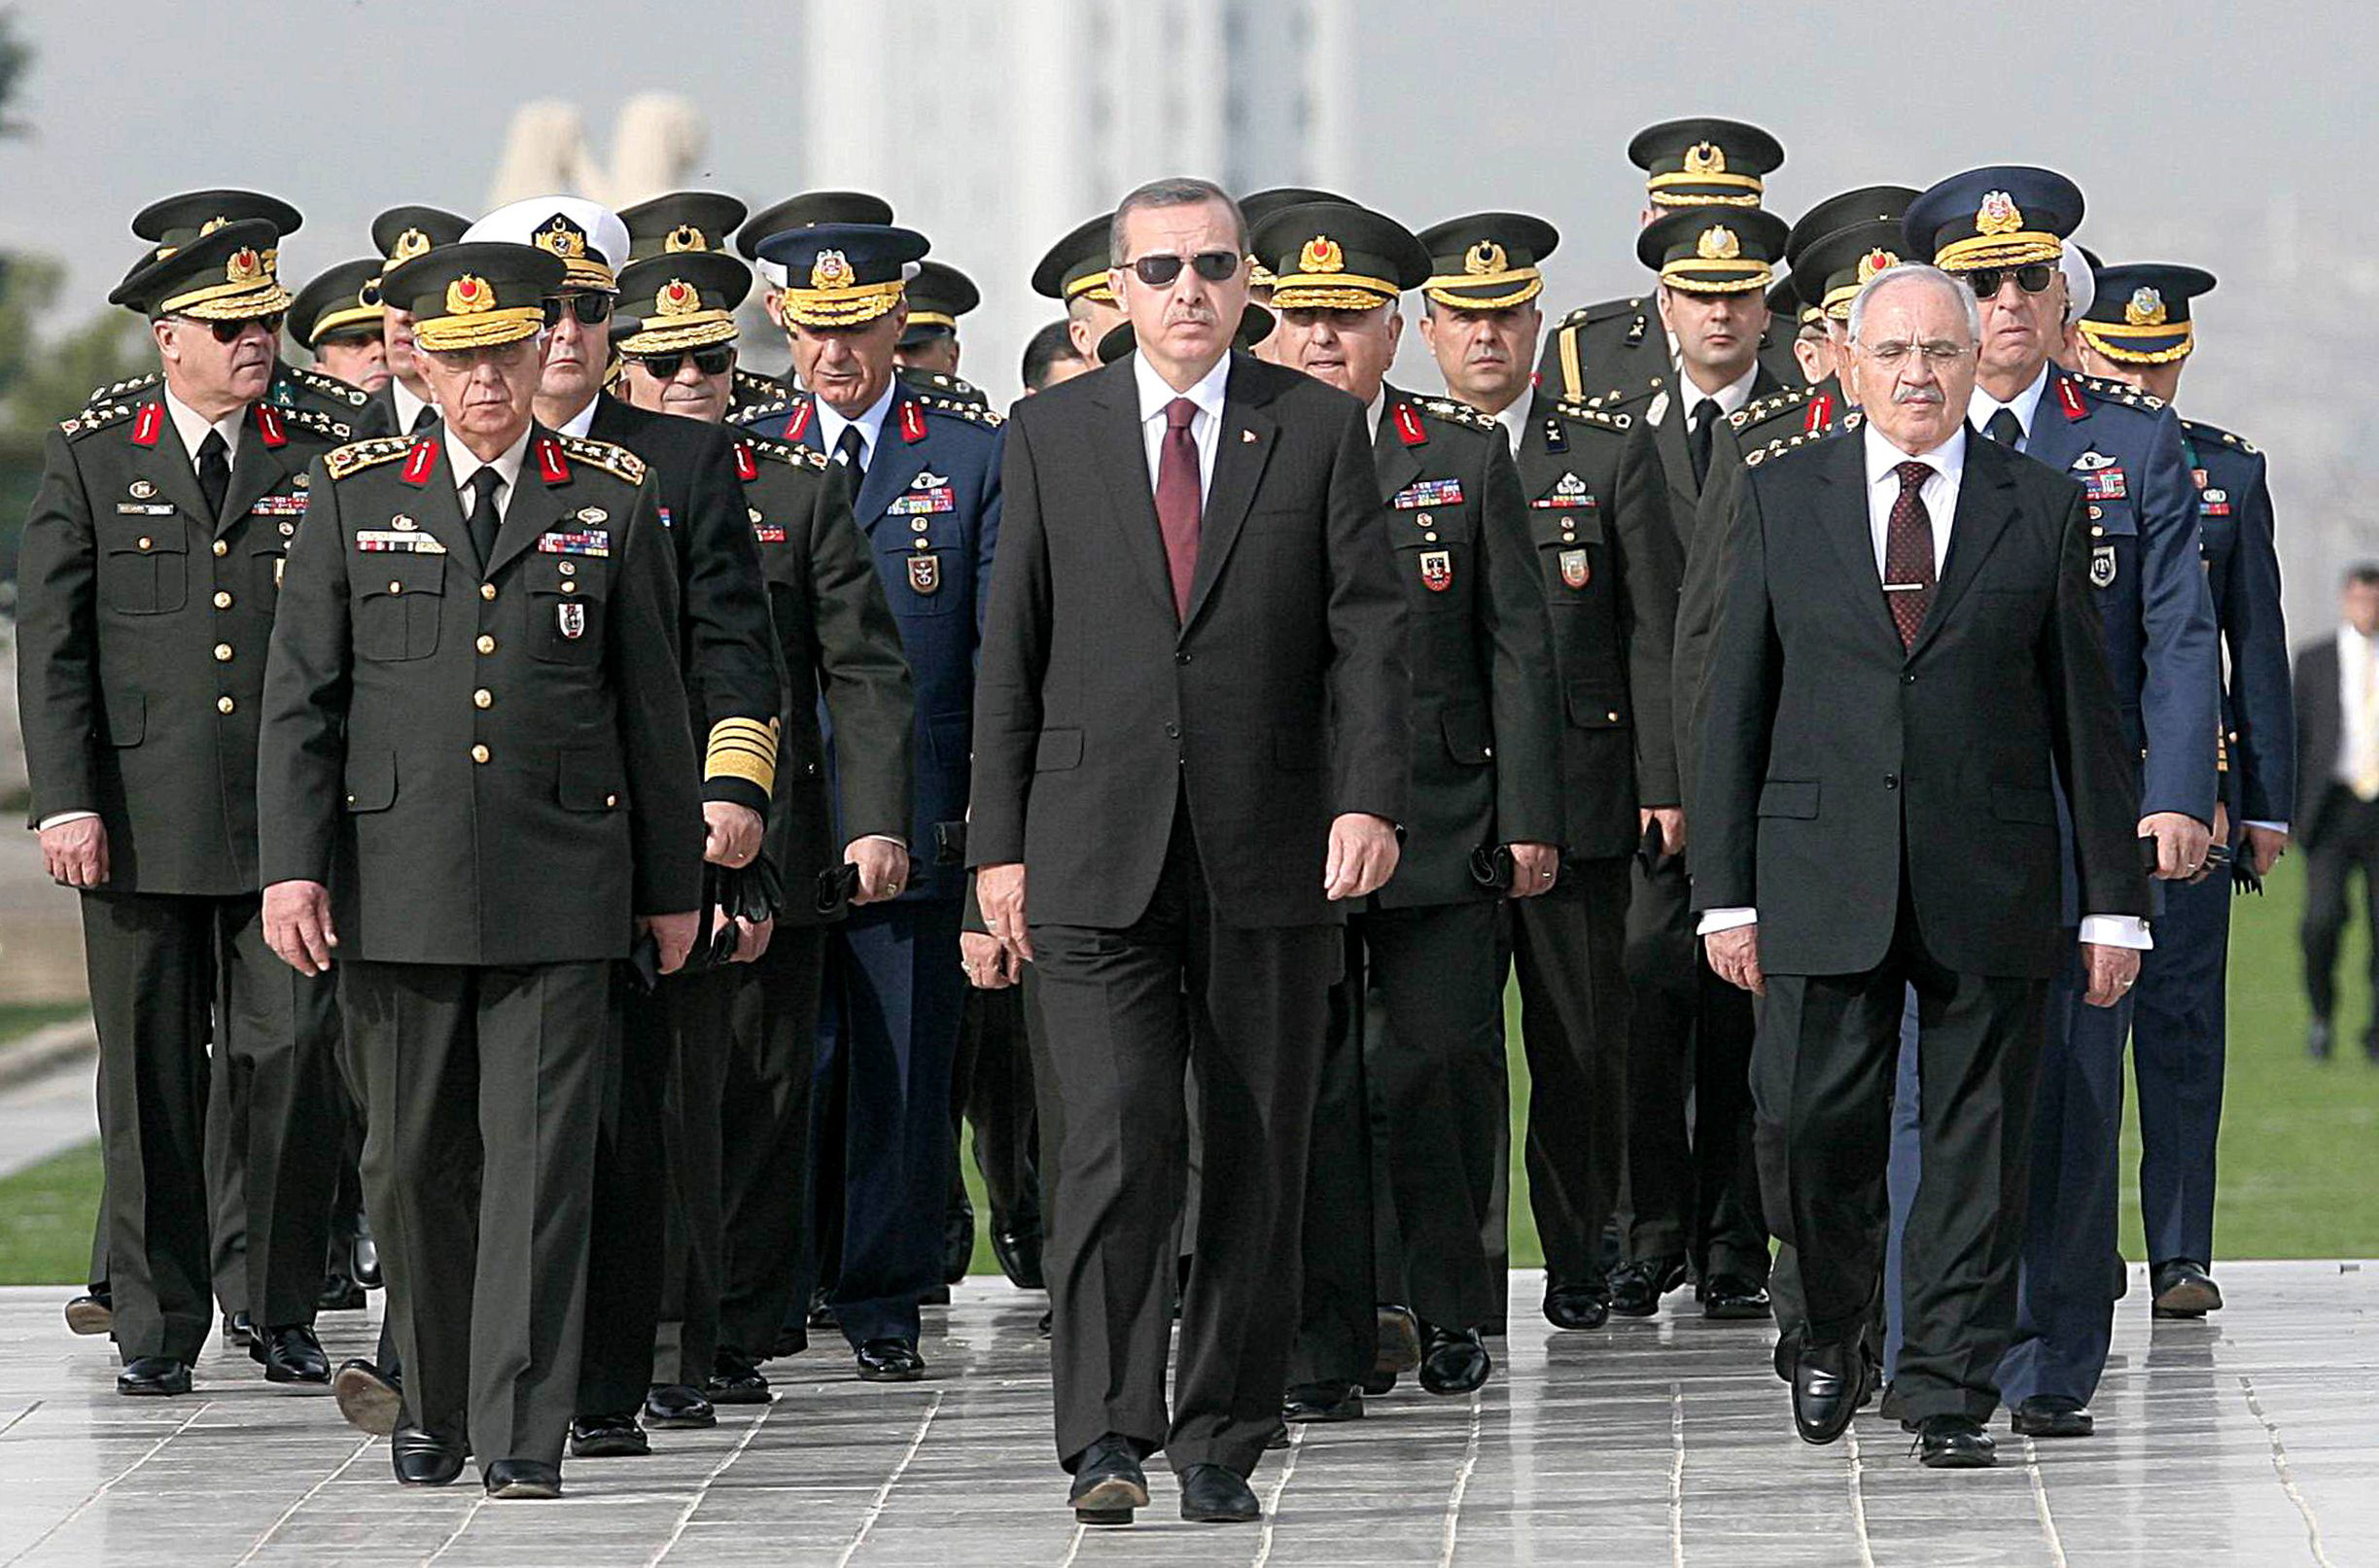 a file photo from 2010 shows prime minister recep tayyip erdogan c attending a wreath laying ceremony with members of the supreme military council at the mausoleum of mustafa kemal ataturk erdogan on march 23 2014 congratulated the military for downing a syrian warplane near its border photo afp file